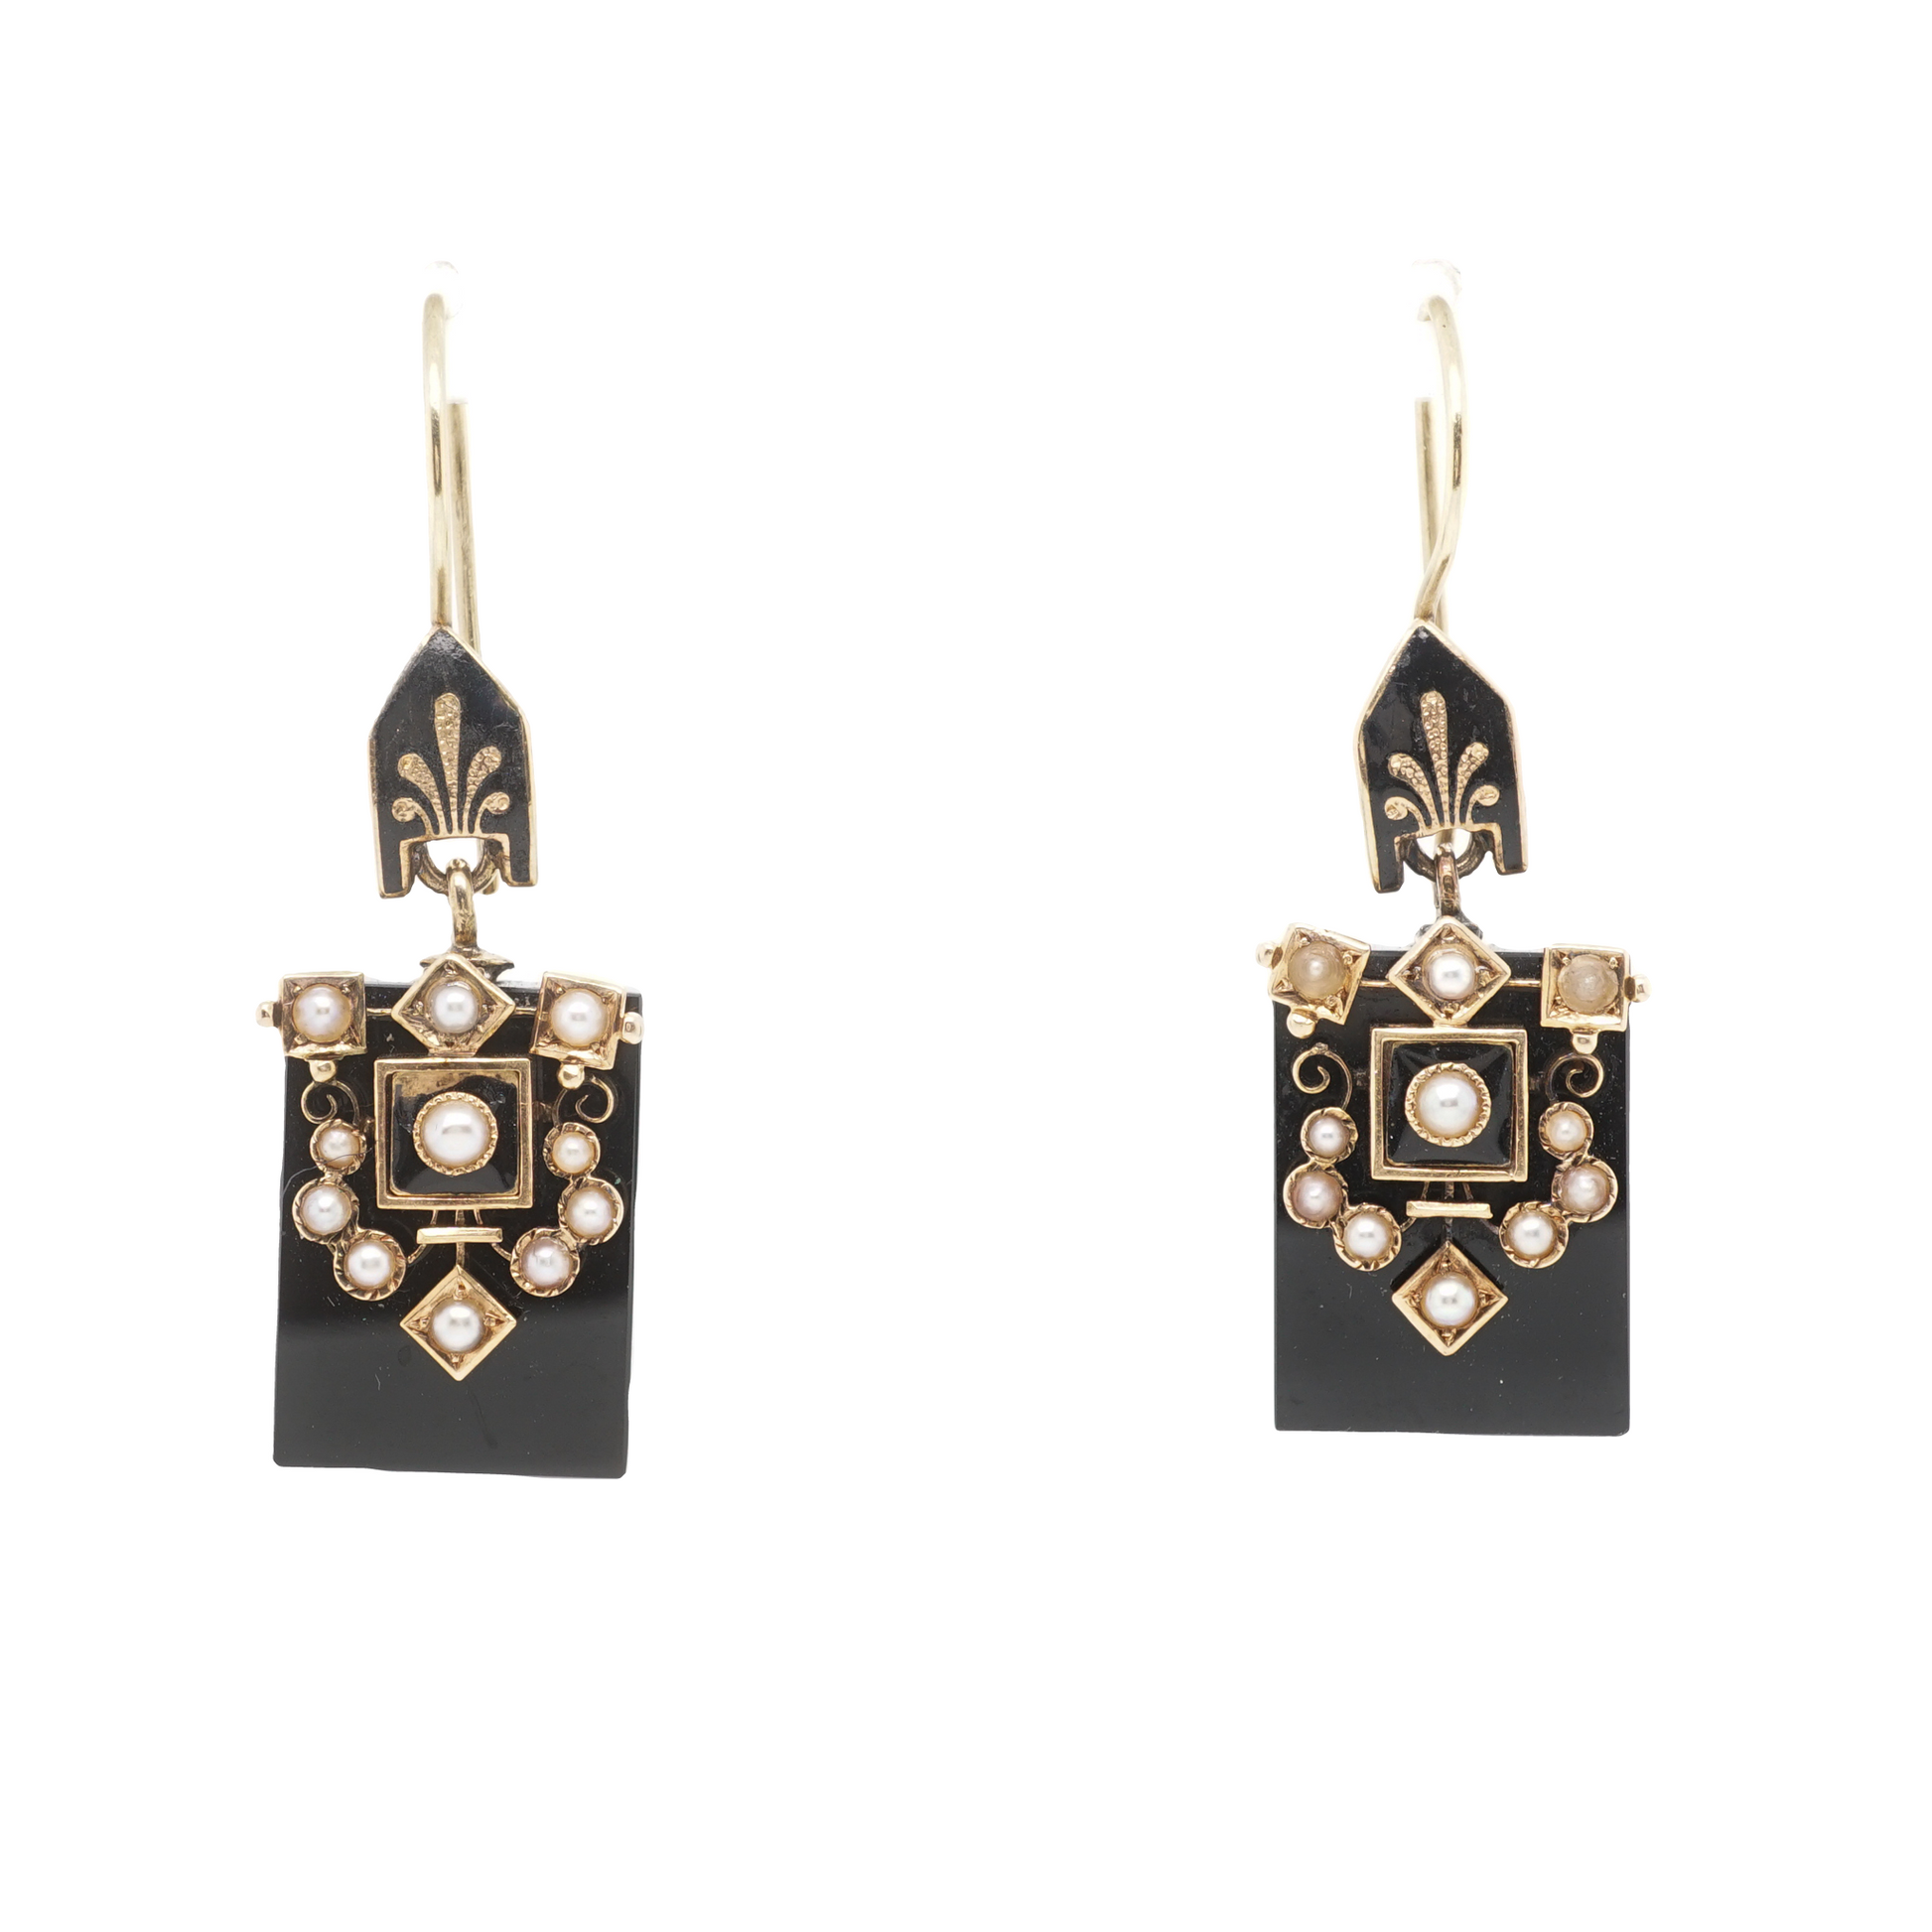 Victorian Onyx & Pearl Earrings in 14k Yellow GoldComposition: 14 Karat Yellow Gold Total Gram Weight: 9.4 g